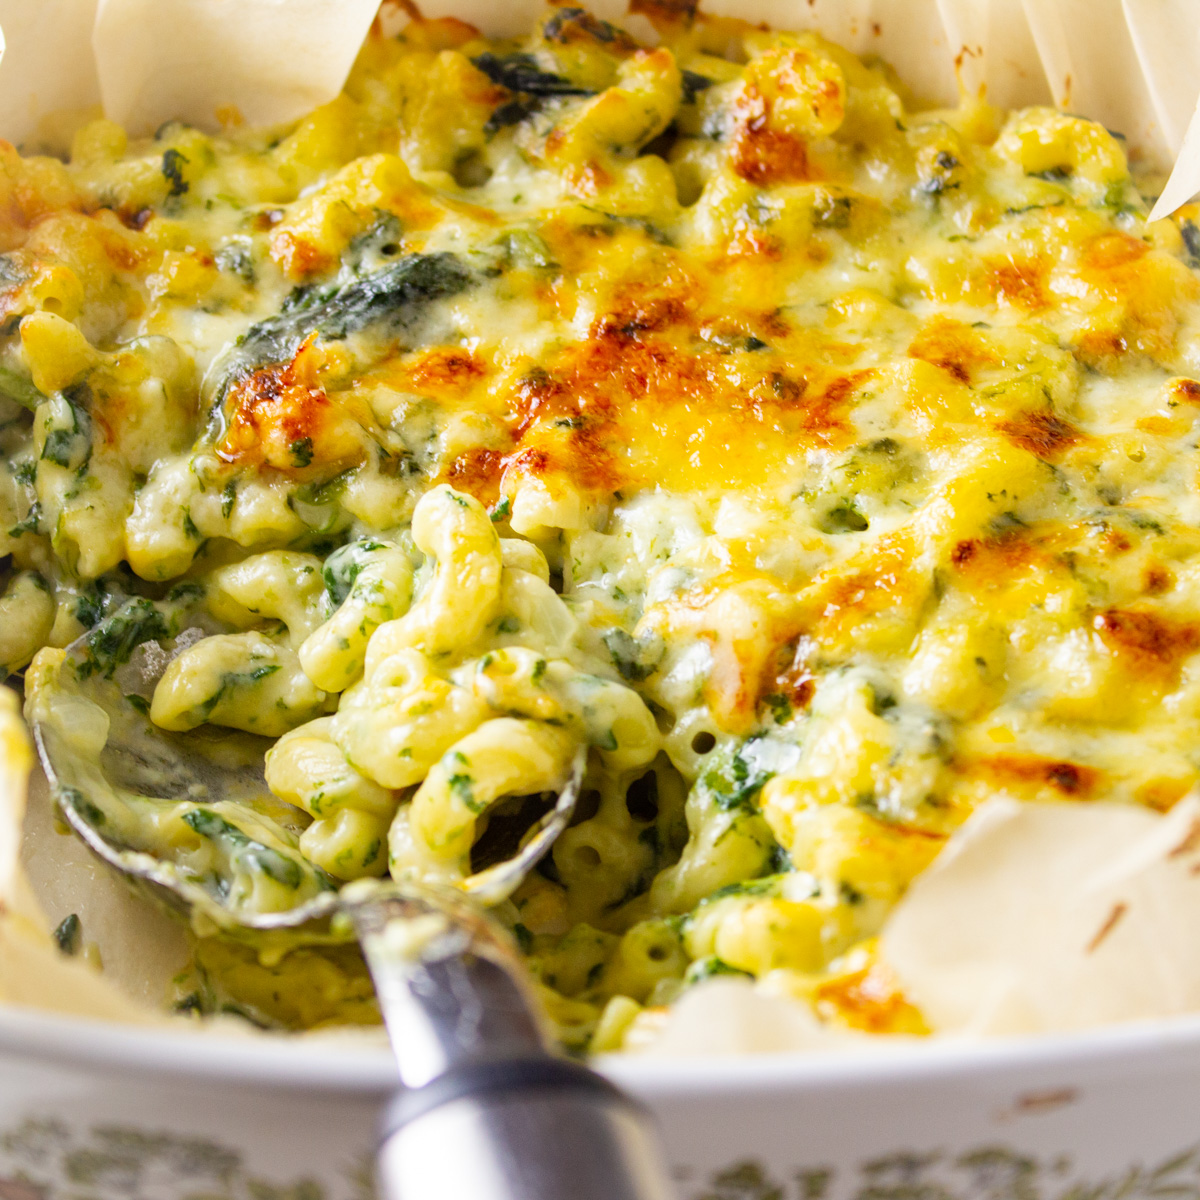 Old Fashioned Baked Macaroni and Cheese with Spinach